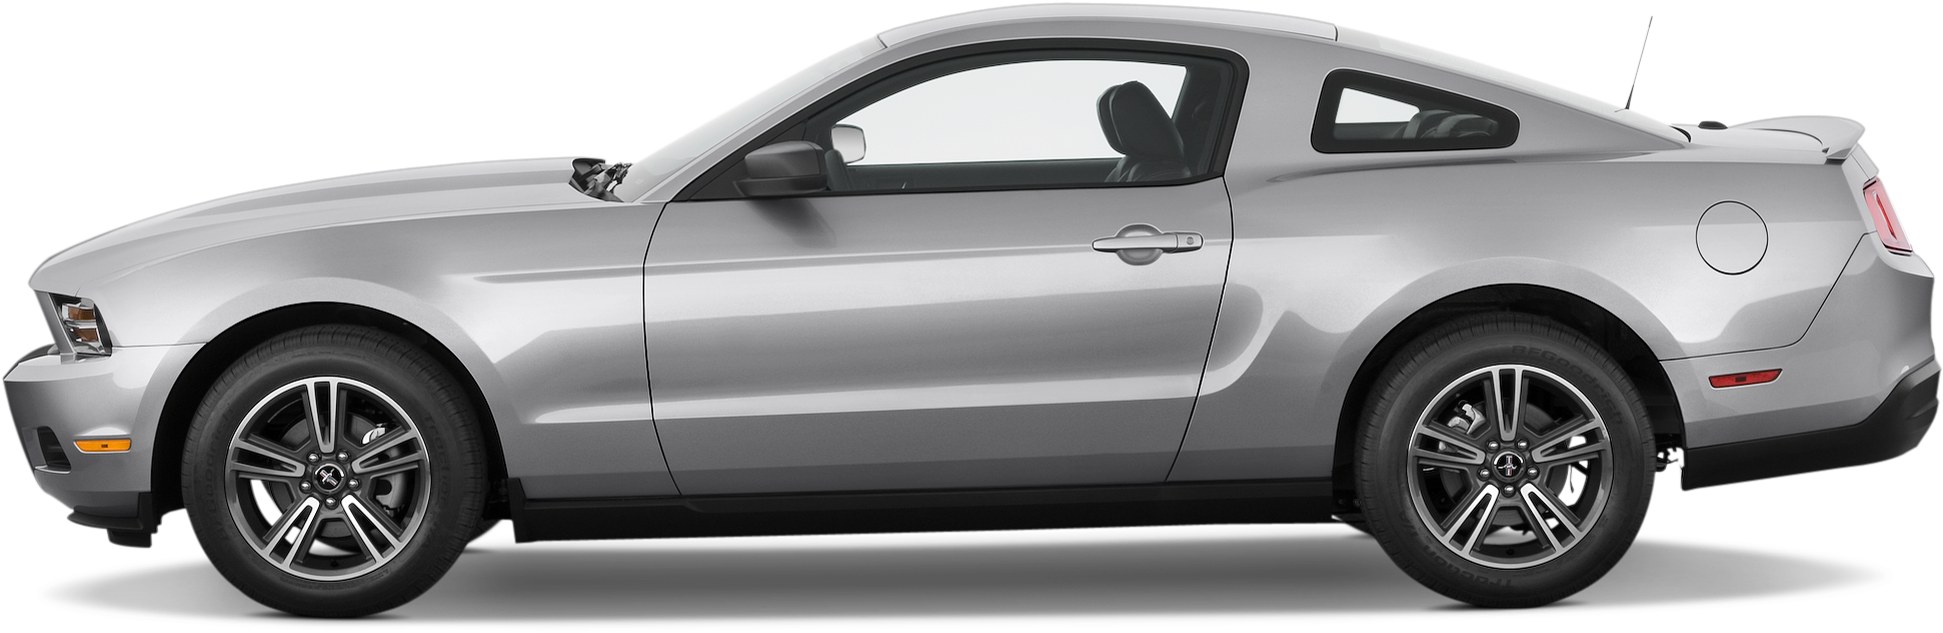 Silver Ford Mustang Side View PNG